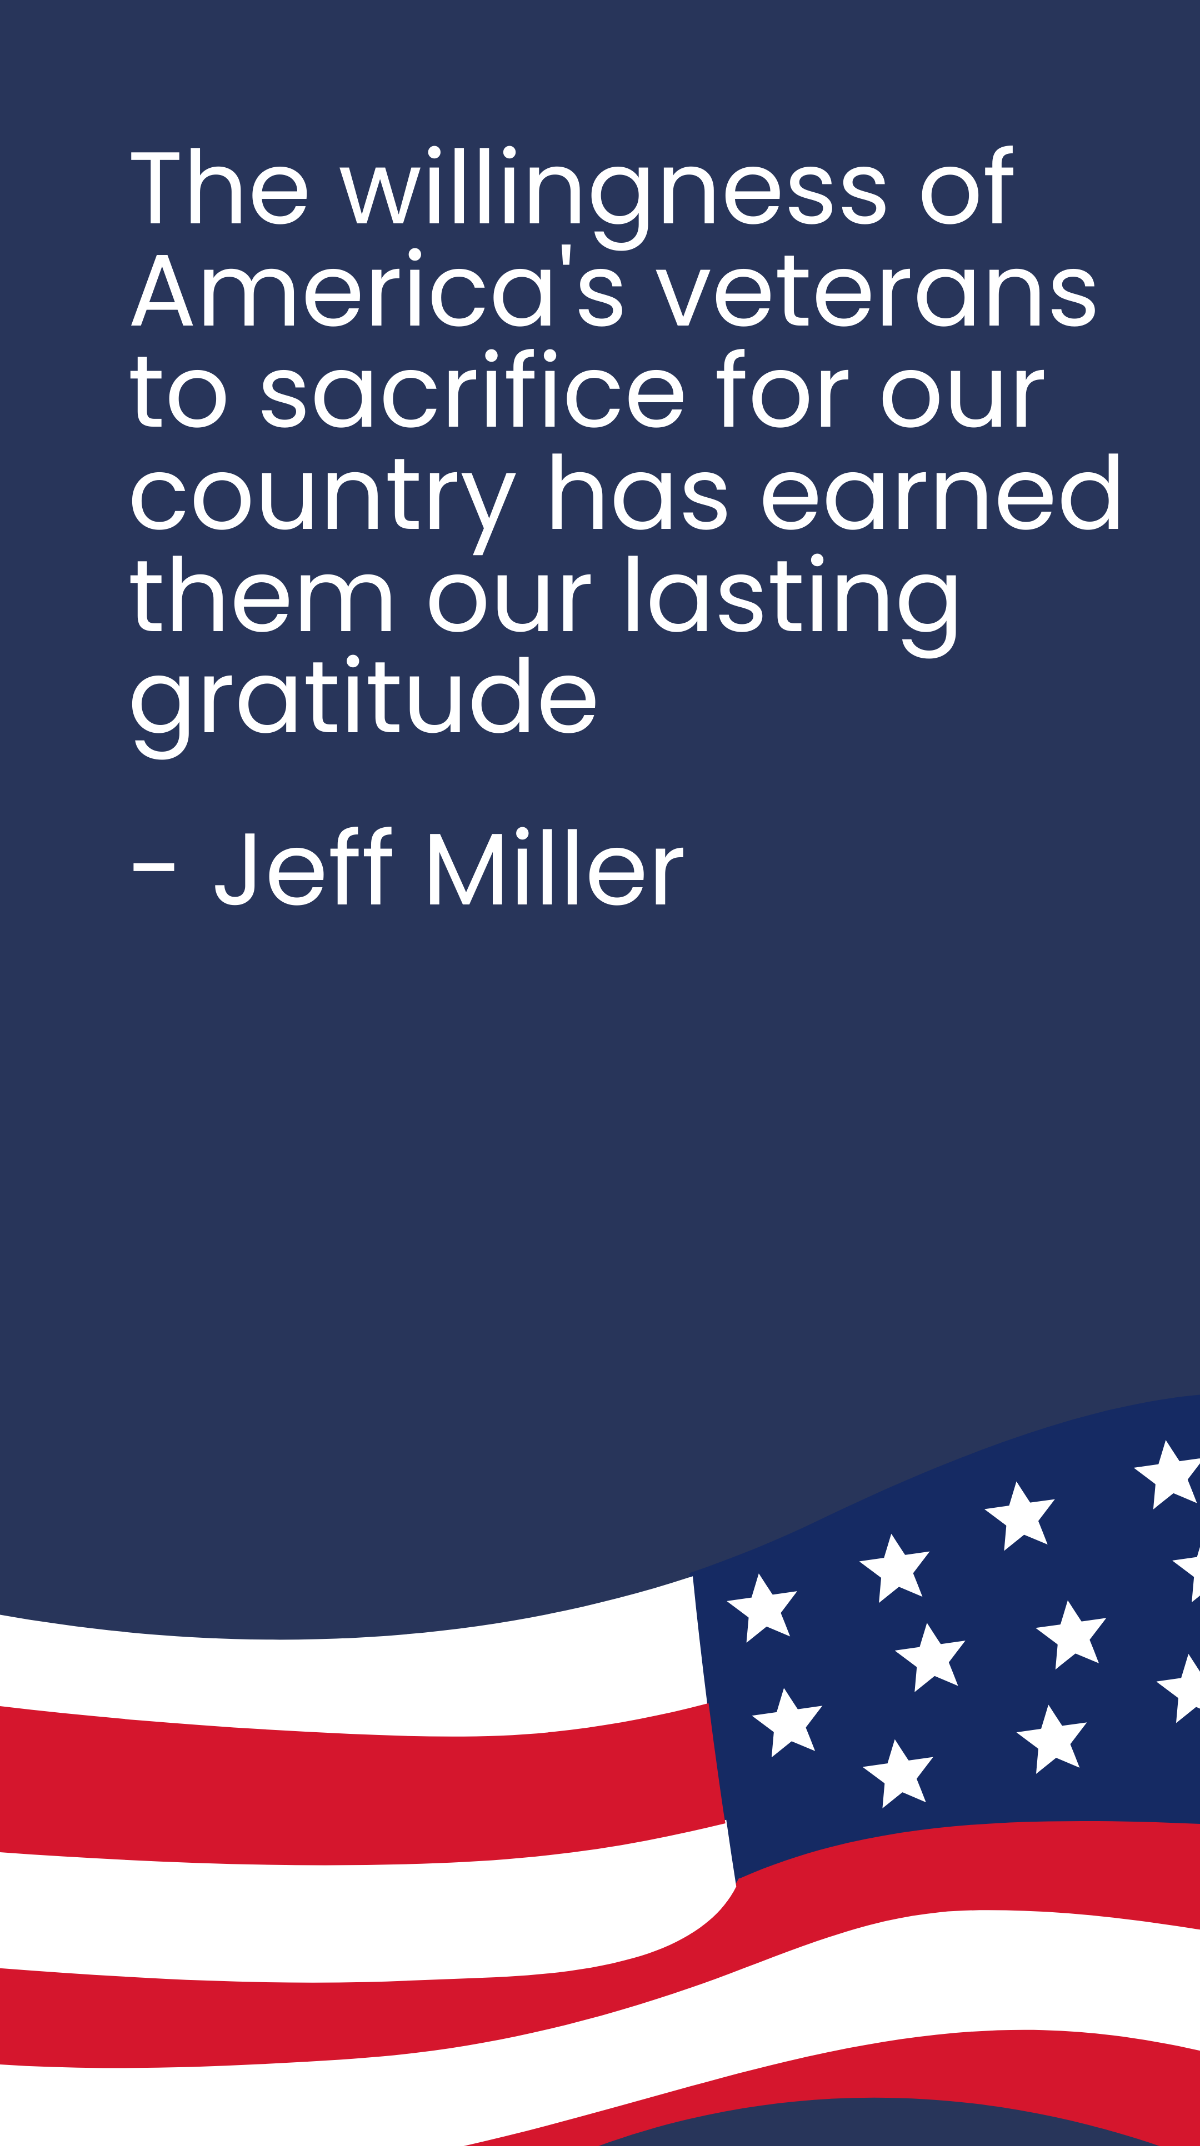 Jeff Miller - The willingness of America's veterans to sacrifice for our country has earned them our lasting gratitude Template